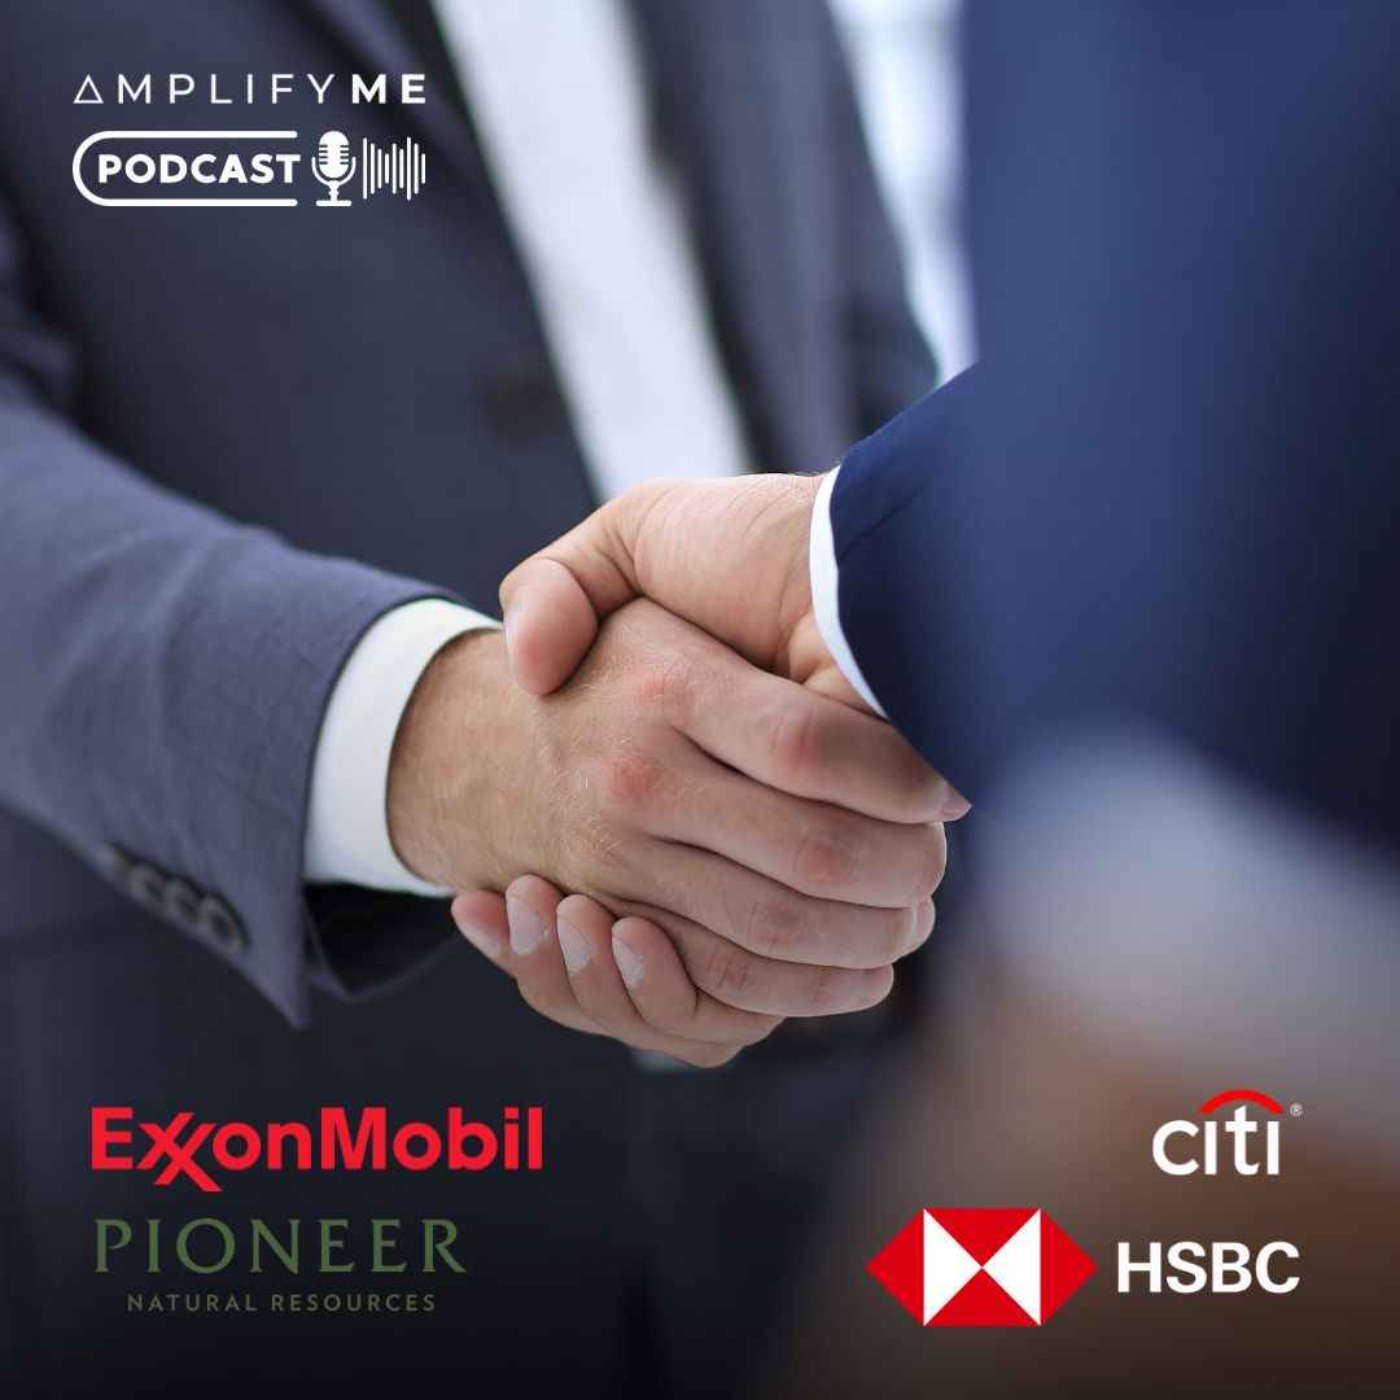 The Deal Room: Citi strikes a $3.6bn deal with HSBC & ExxonMobil looks to acquire Pioneer for $56bn